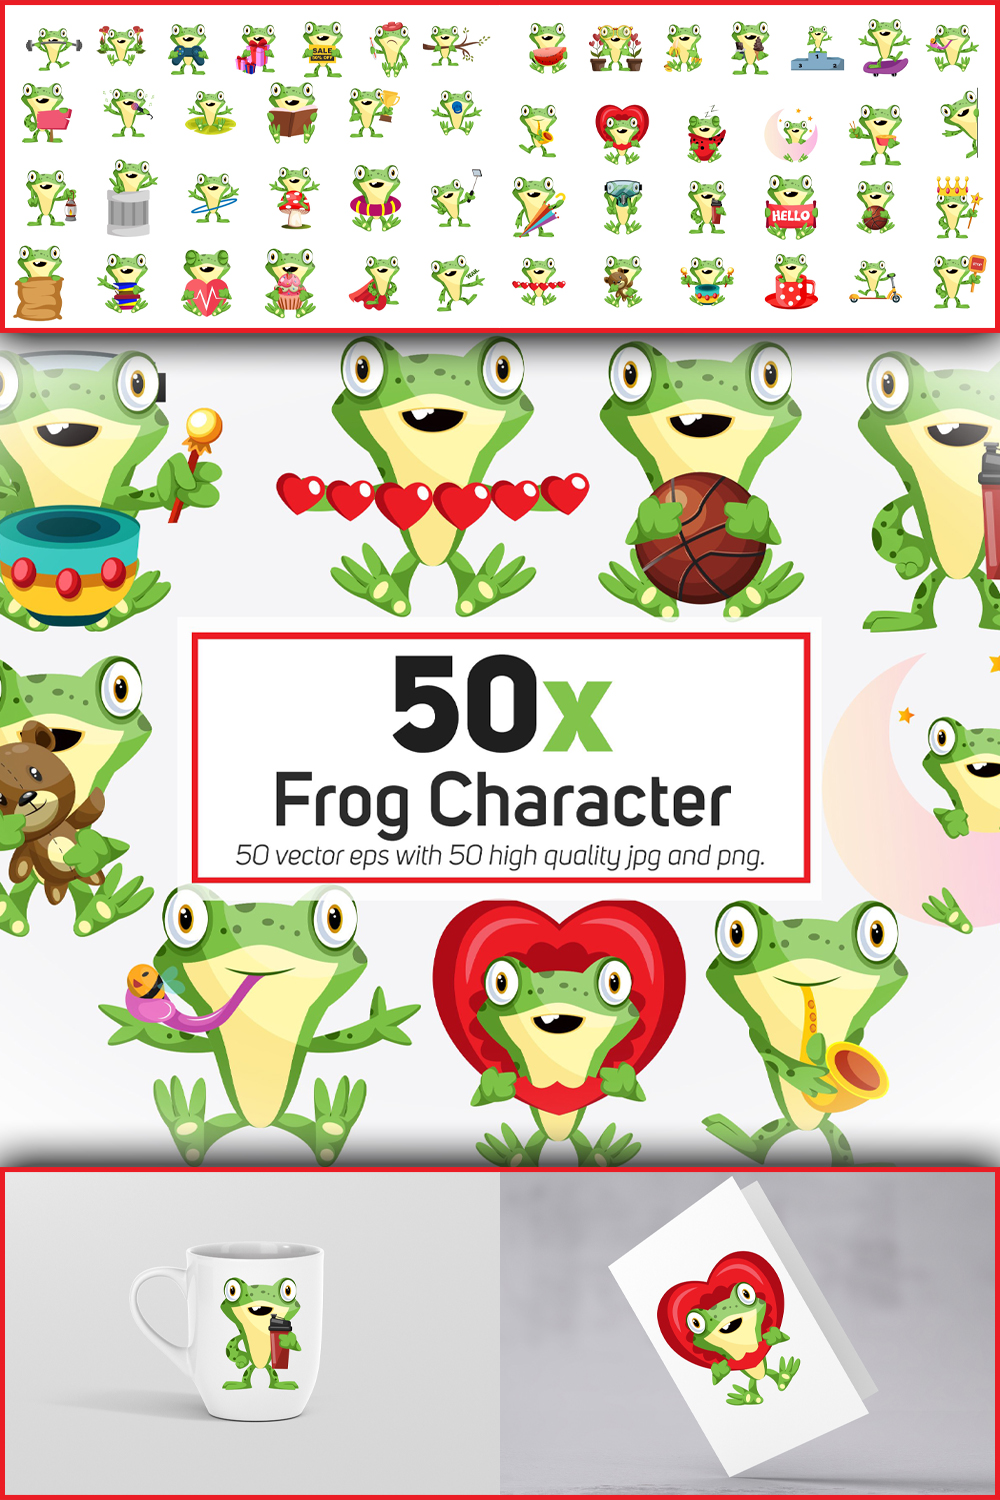 541777 50x frog character in different situation collecti pinterest 1000 1500 991